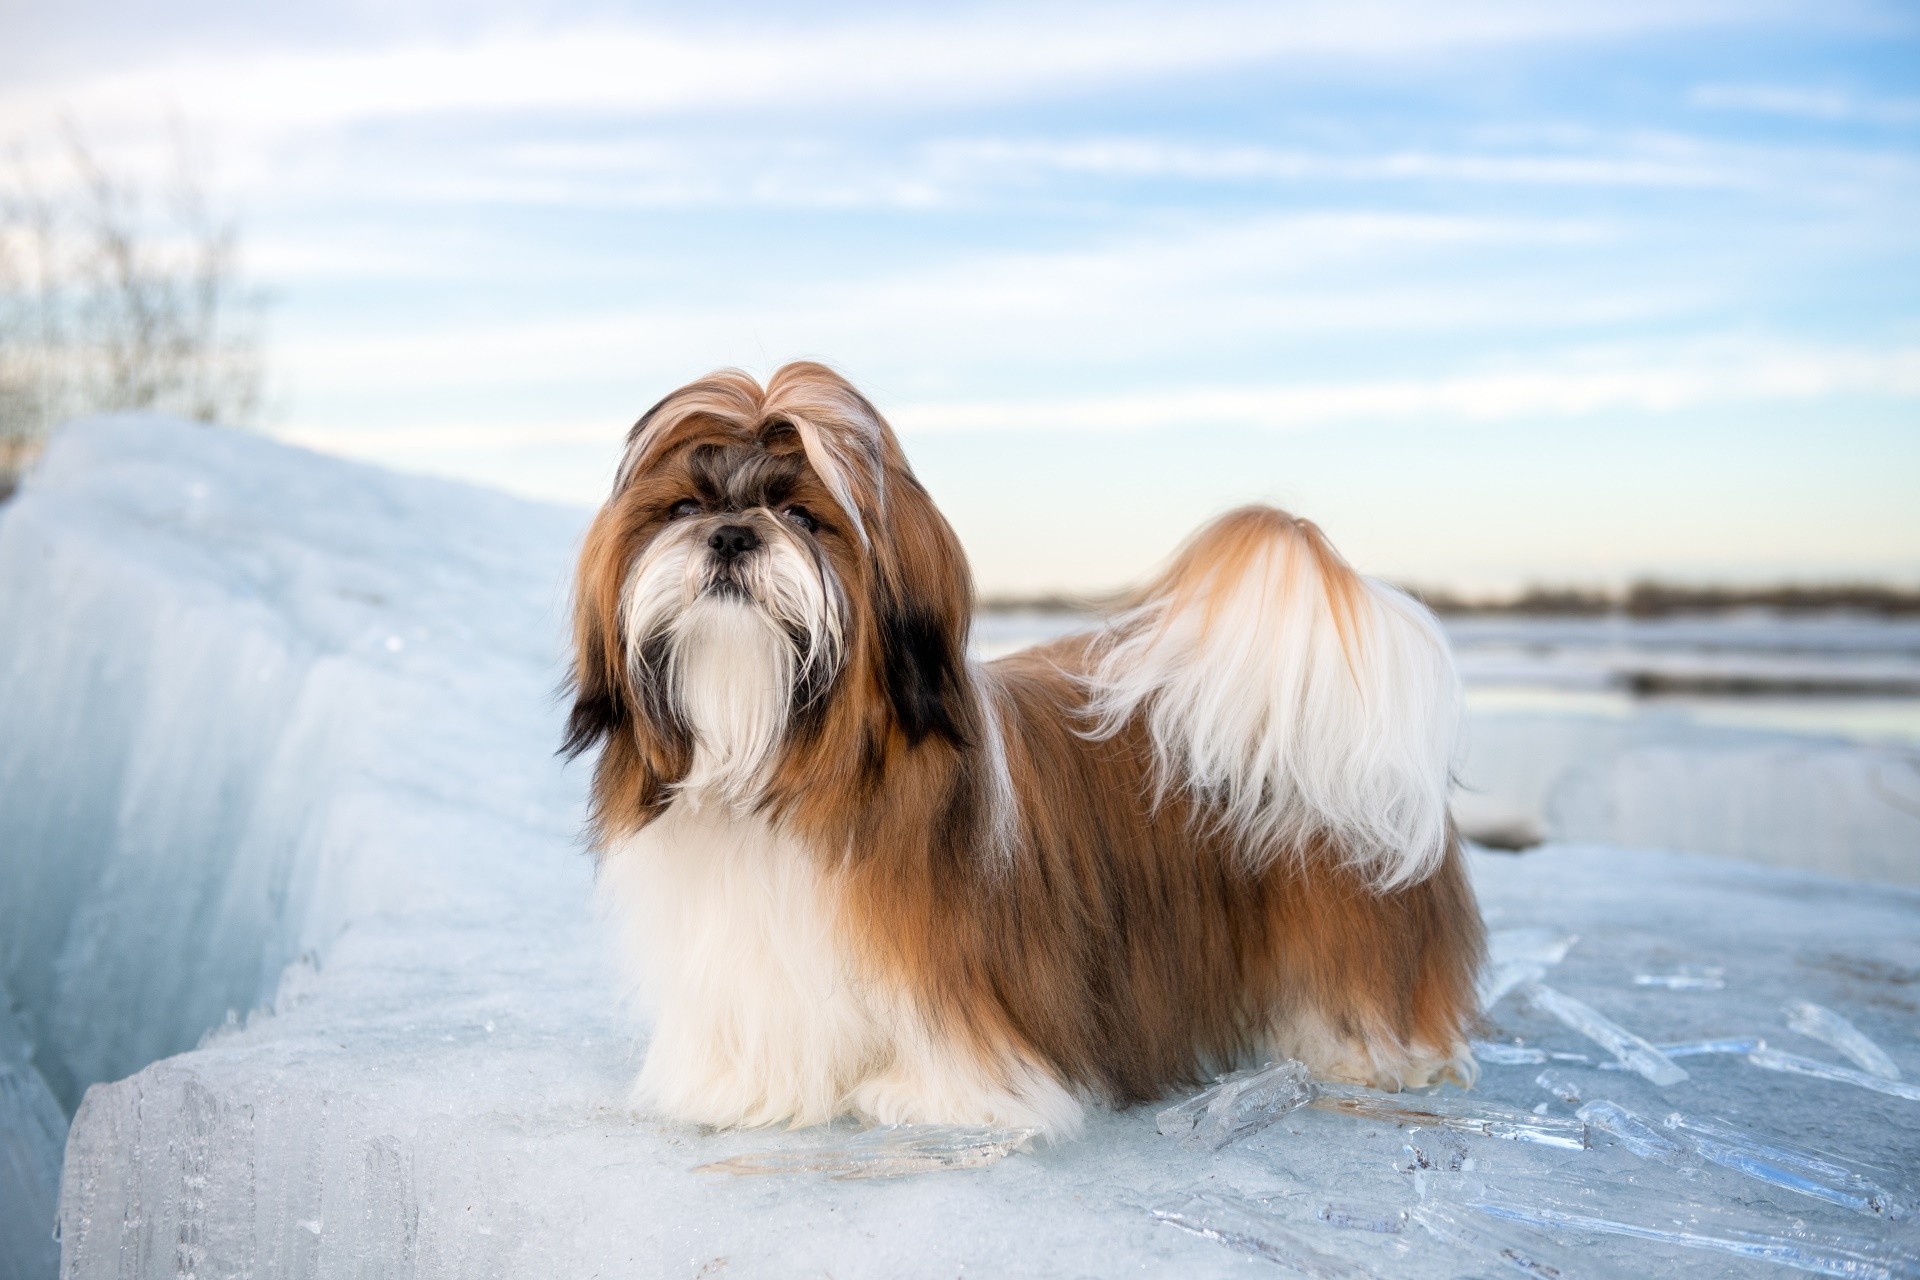 Shih Tzu standing on an ice floe with icicles